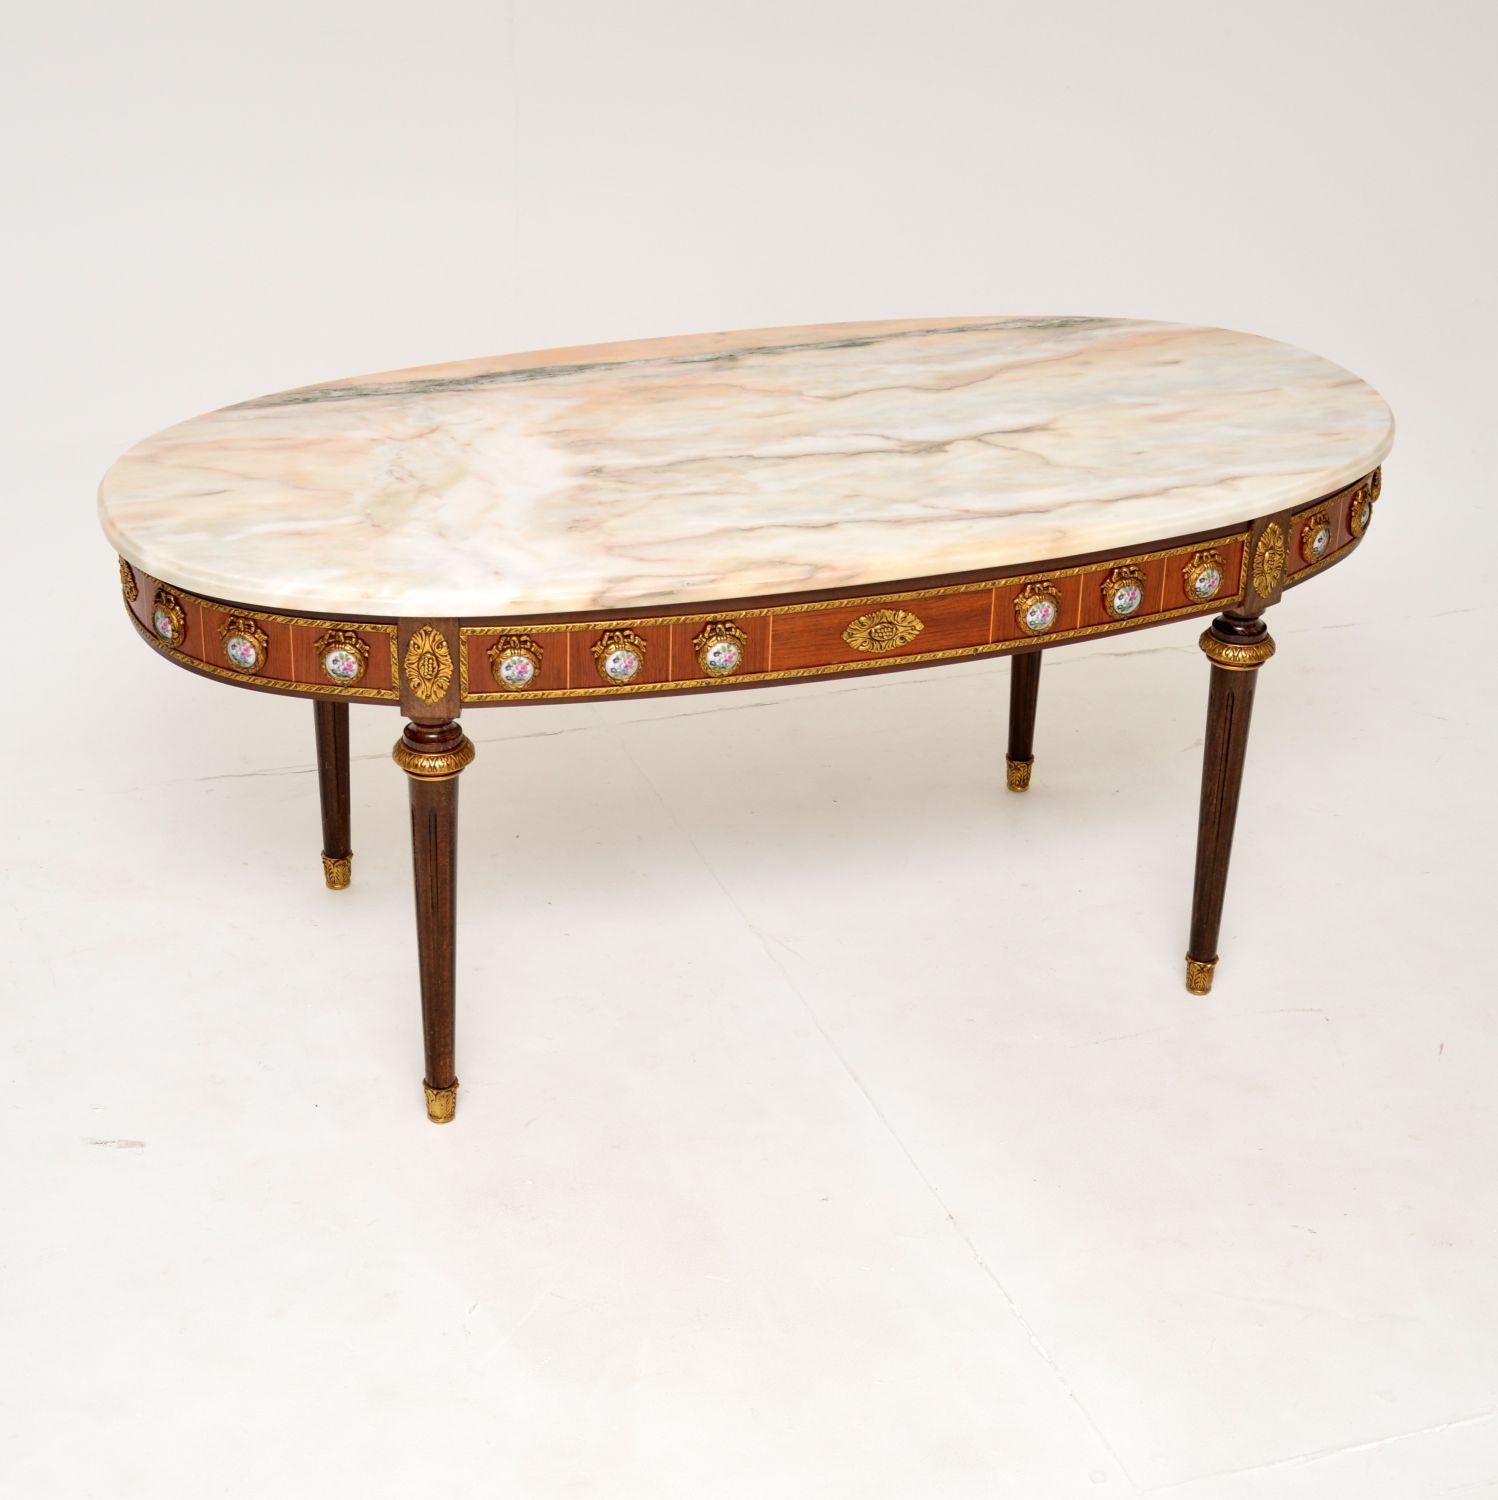 A beautiful antique French marble top coffee table, dating from around the 1930-1950’s.

It has a gorgeous design, with a mahogany and walnut frame, and stunning painted porcelain Limoges plaques set in gilt bronze mounts all around the top edge.